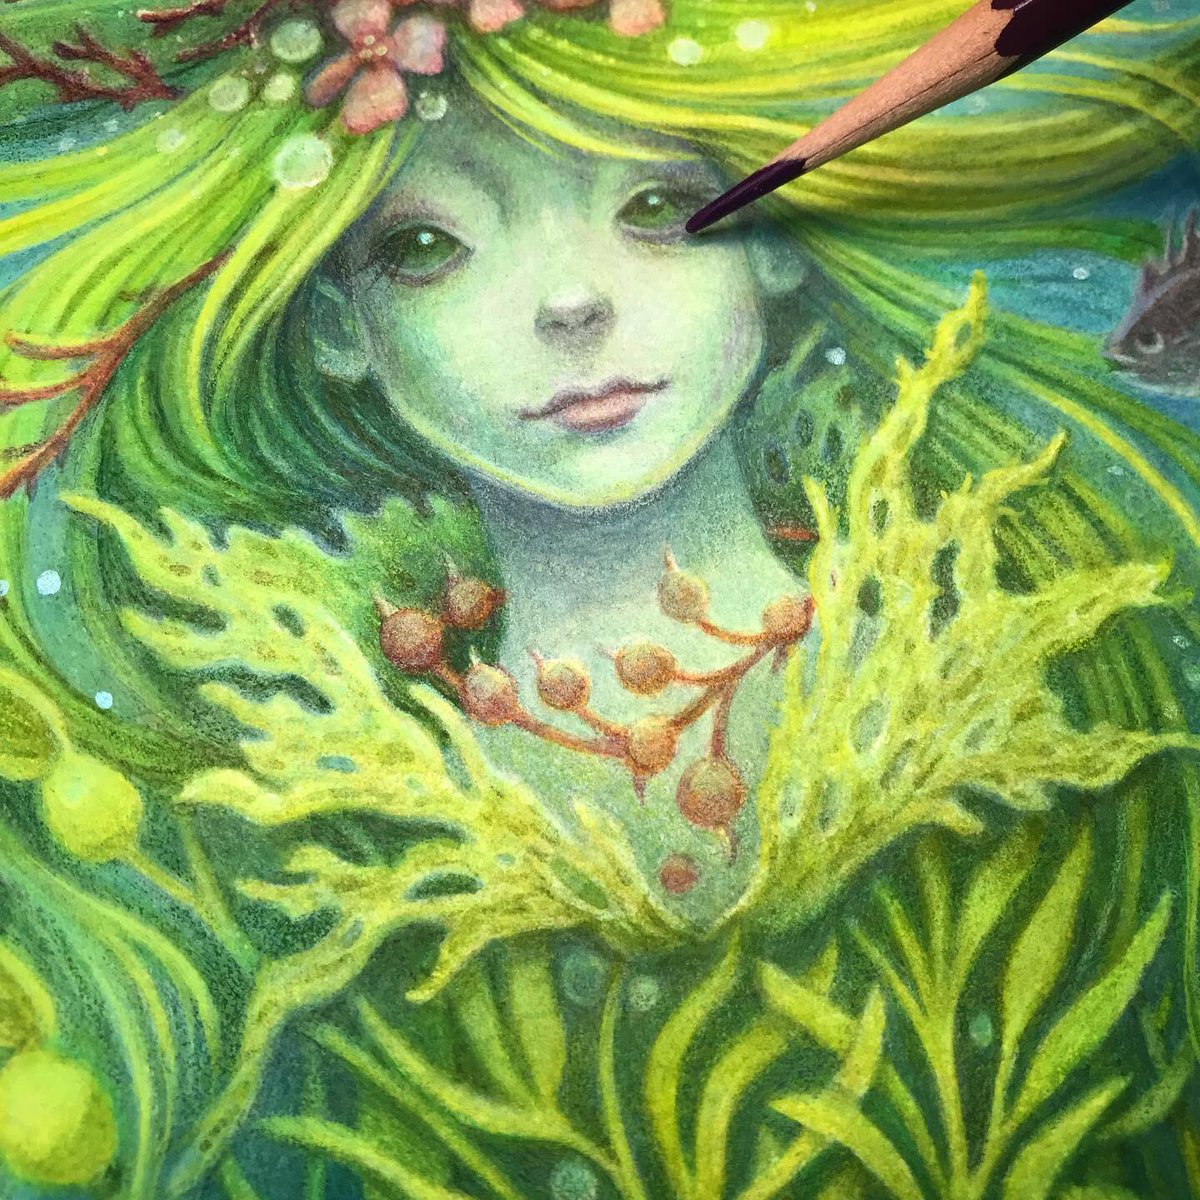 Neptune’s Dream, my latest painting. I read about the Roman goddess Salacia, who represented calm seas. I’ve always thought of kelp forests as calm and peaceful ecosystems, and this idea came about. #kelpforest #art #artists